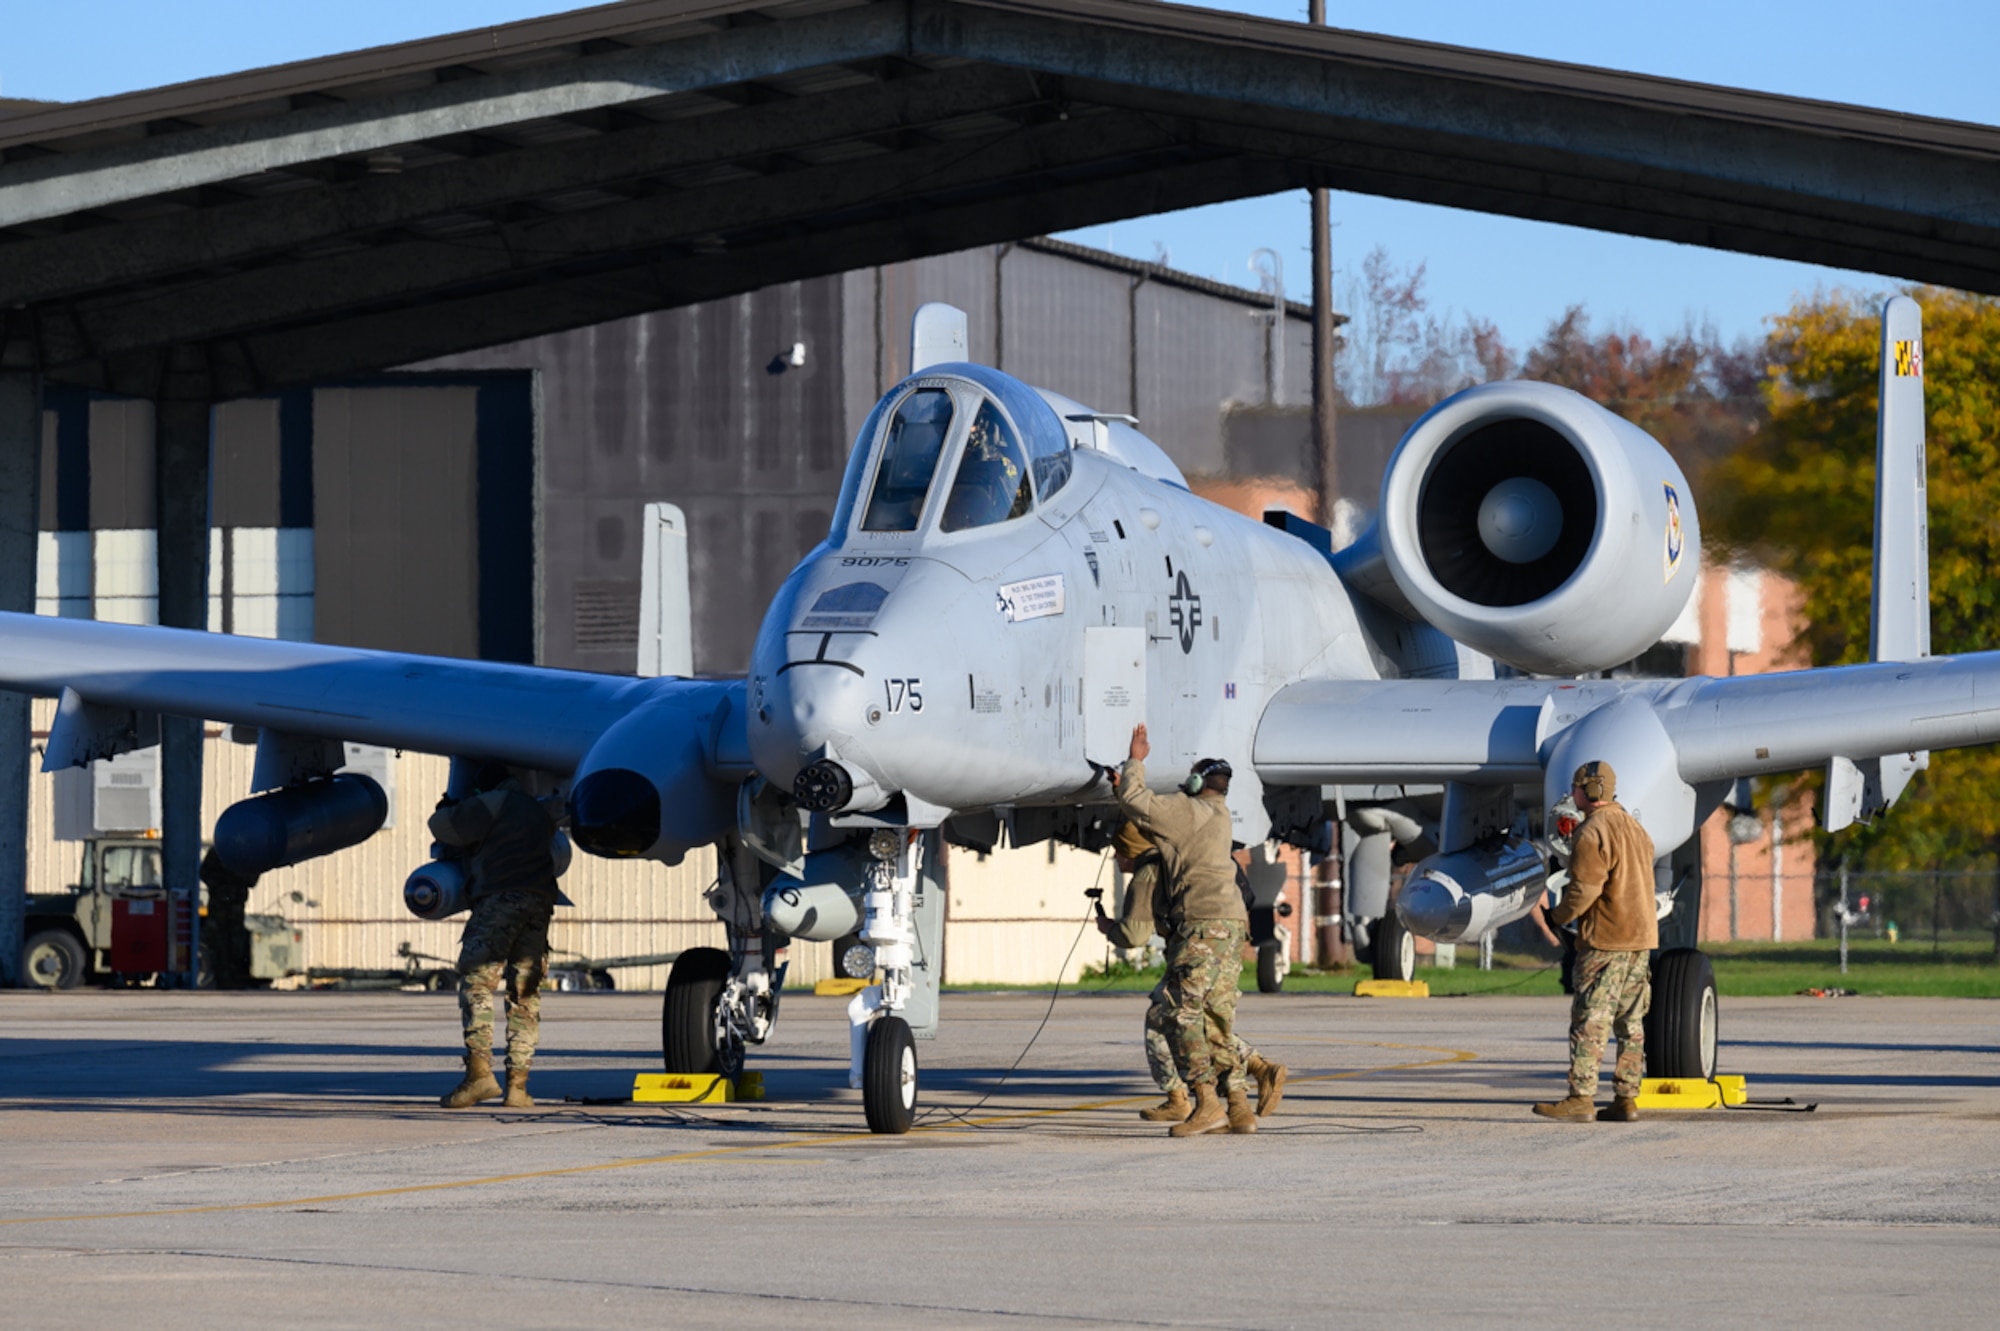 16 A-10C Thunderbolt II aircraft assigned to the 175th Wing, Maryland Air National Guard, conduct a mission generation exercise and an “elephant walk” at Warfield Air National Guard Base at Martin State Airport, Middle River, Md., November 3, 2021. The mission generation exercise highlighted the agility and rapid mobility of the MDANG's airpower, demonstrating their ability to launch combat-ready A-10s that are deployable for no-notice contingency operations. The 175th Wing trains to maintain lethal and combat-ready forces, prepared to deter or defeat any adversary who threatens U.S. or NATO interests.